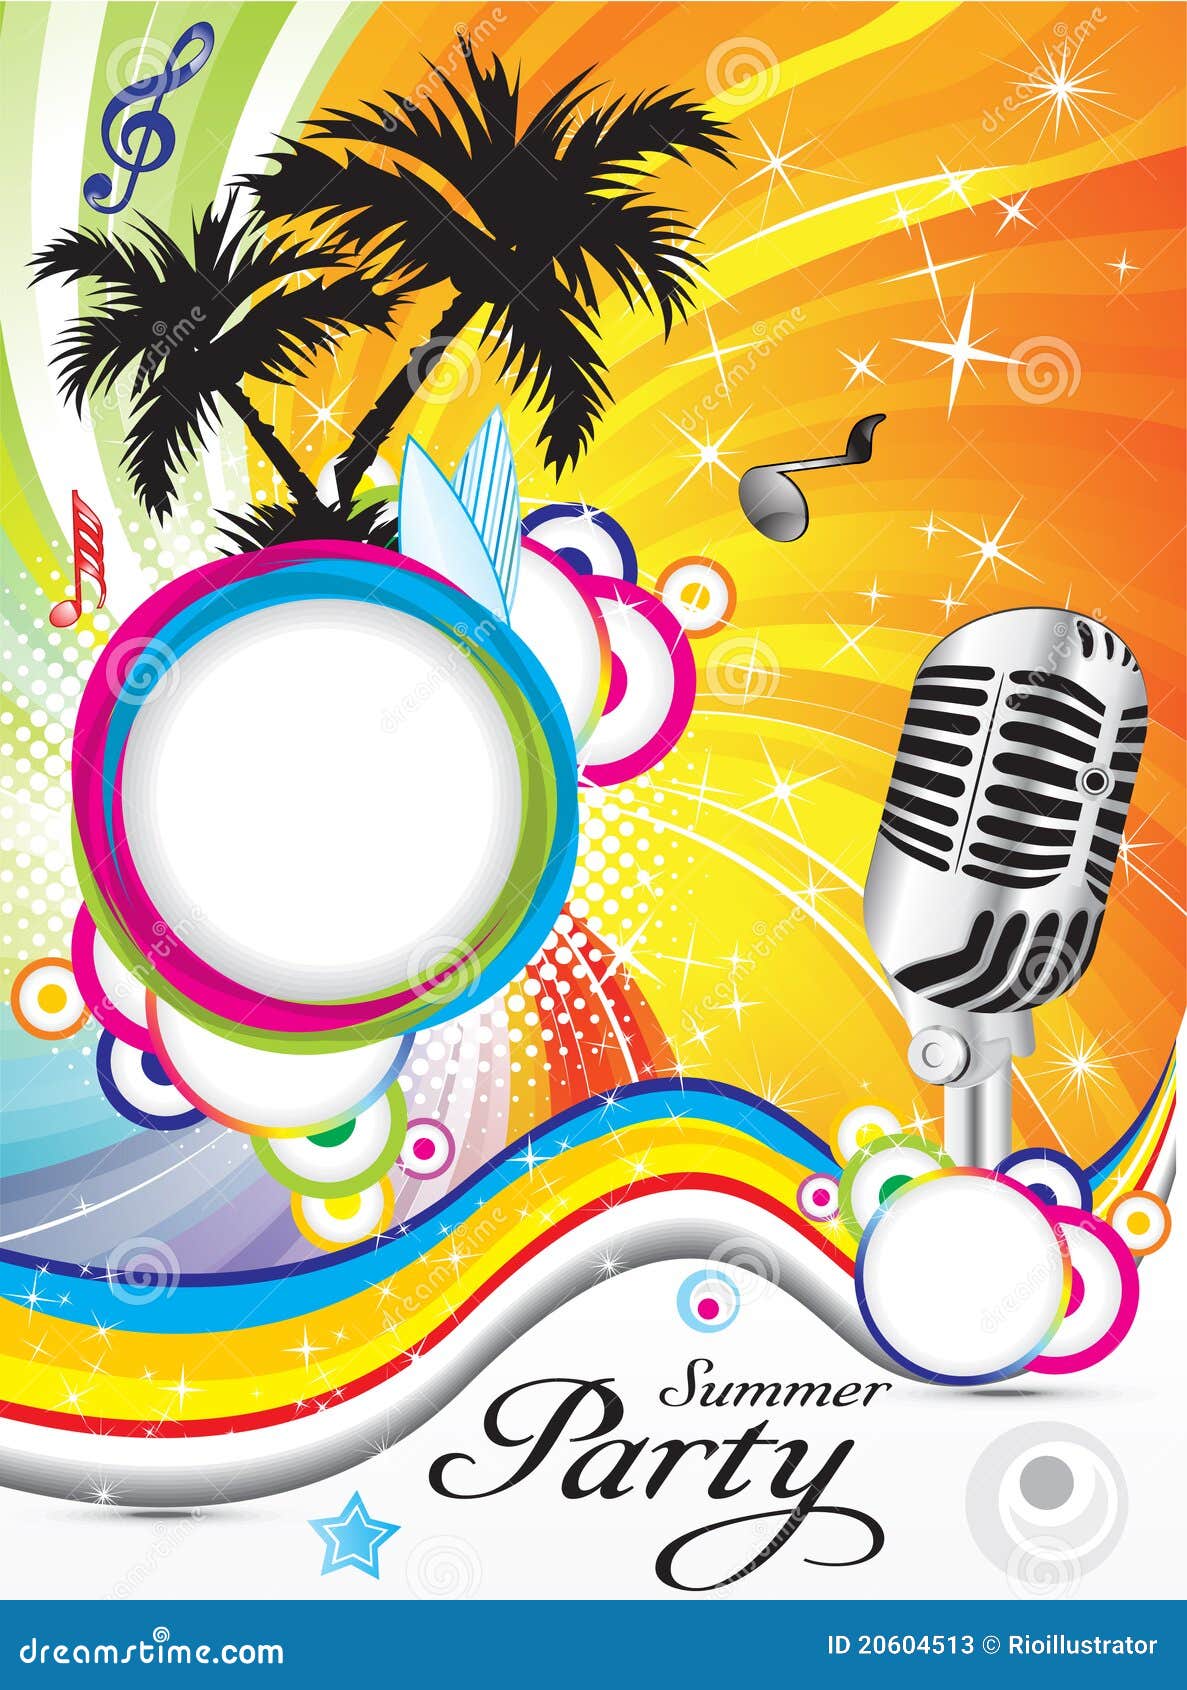 Abstract Summer Party Background Stock Photos - Image: 20604513